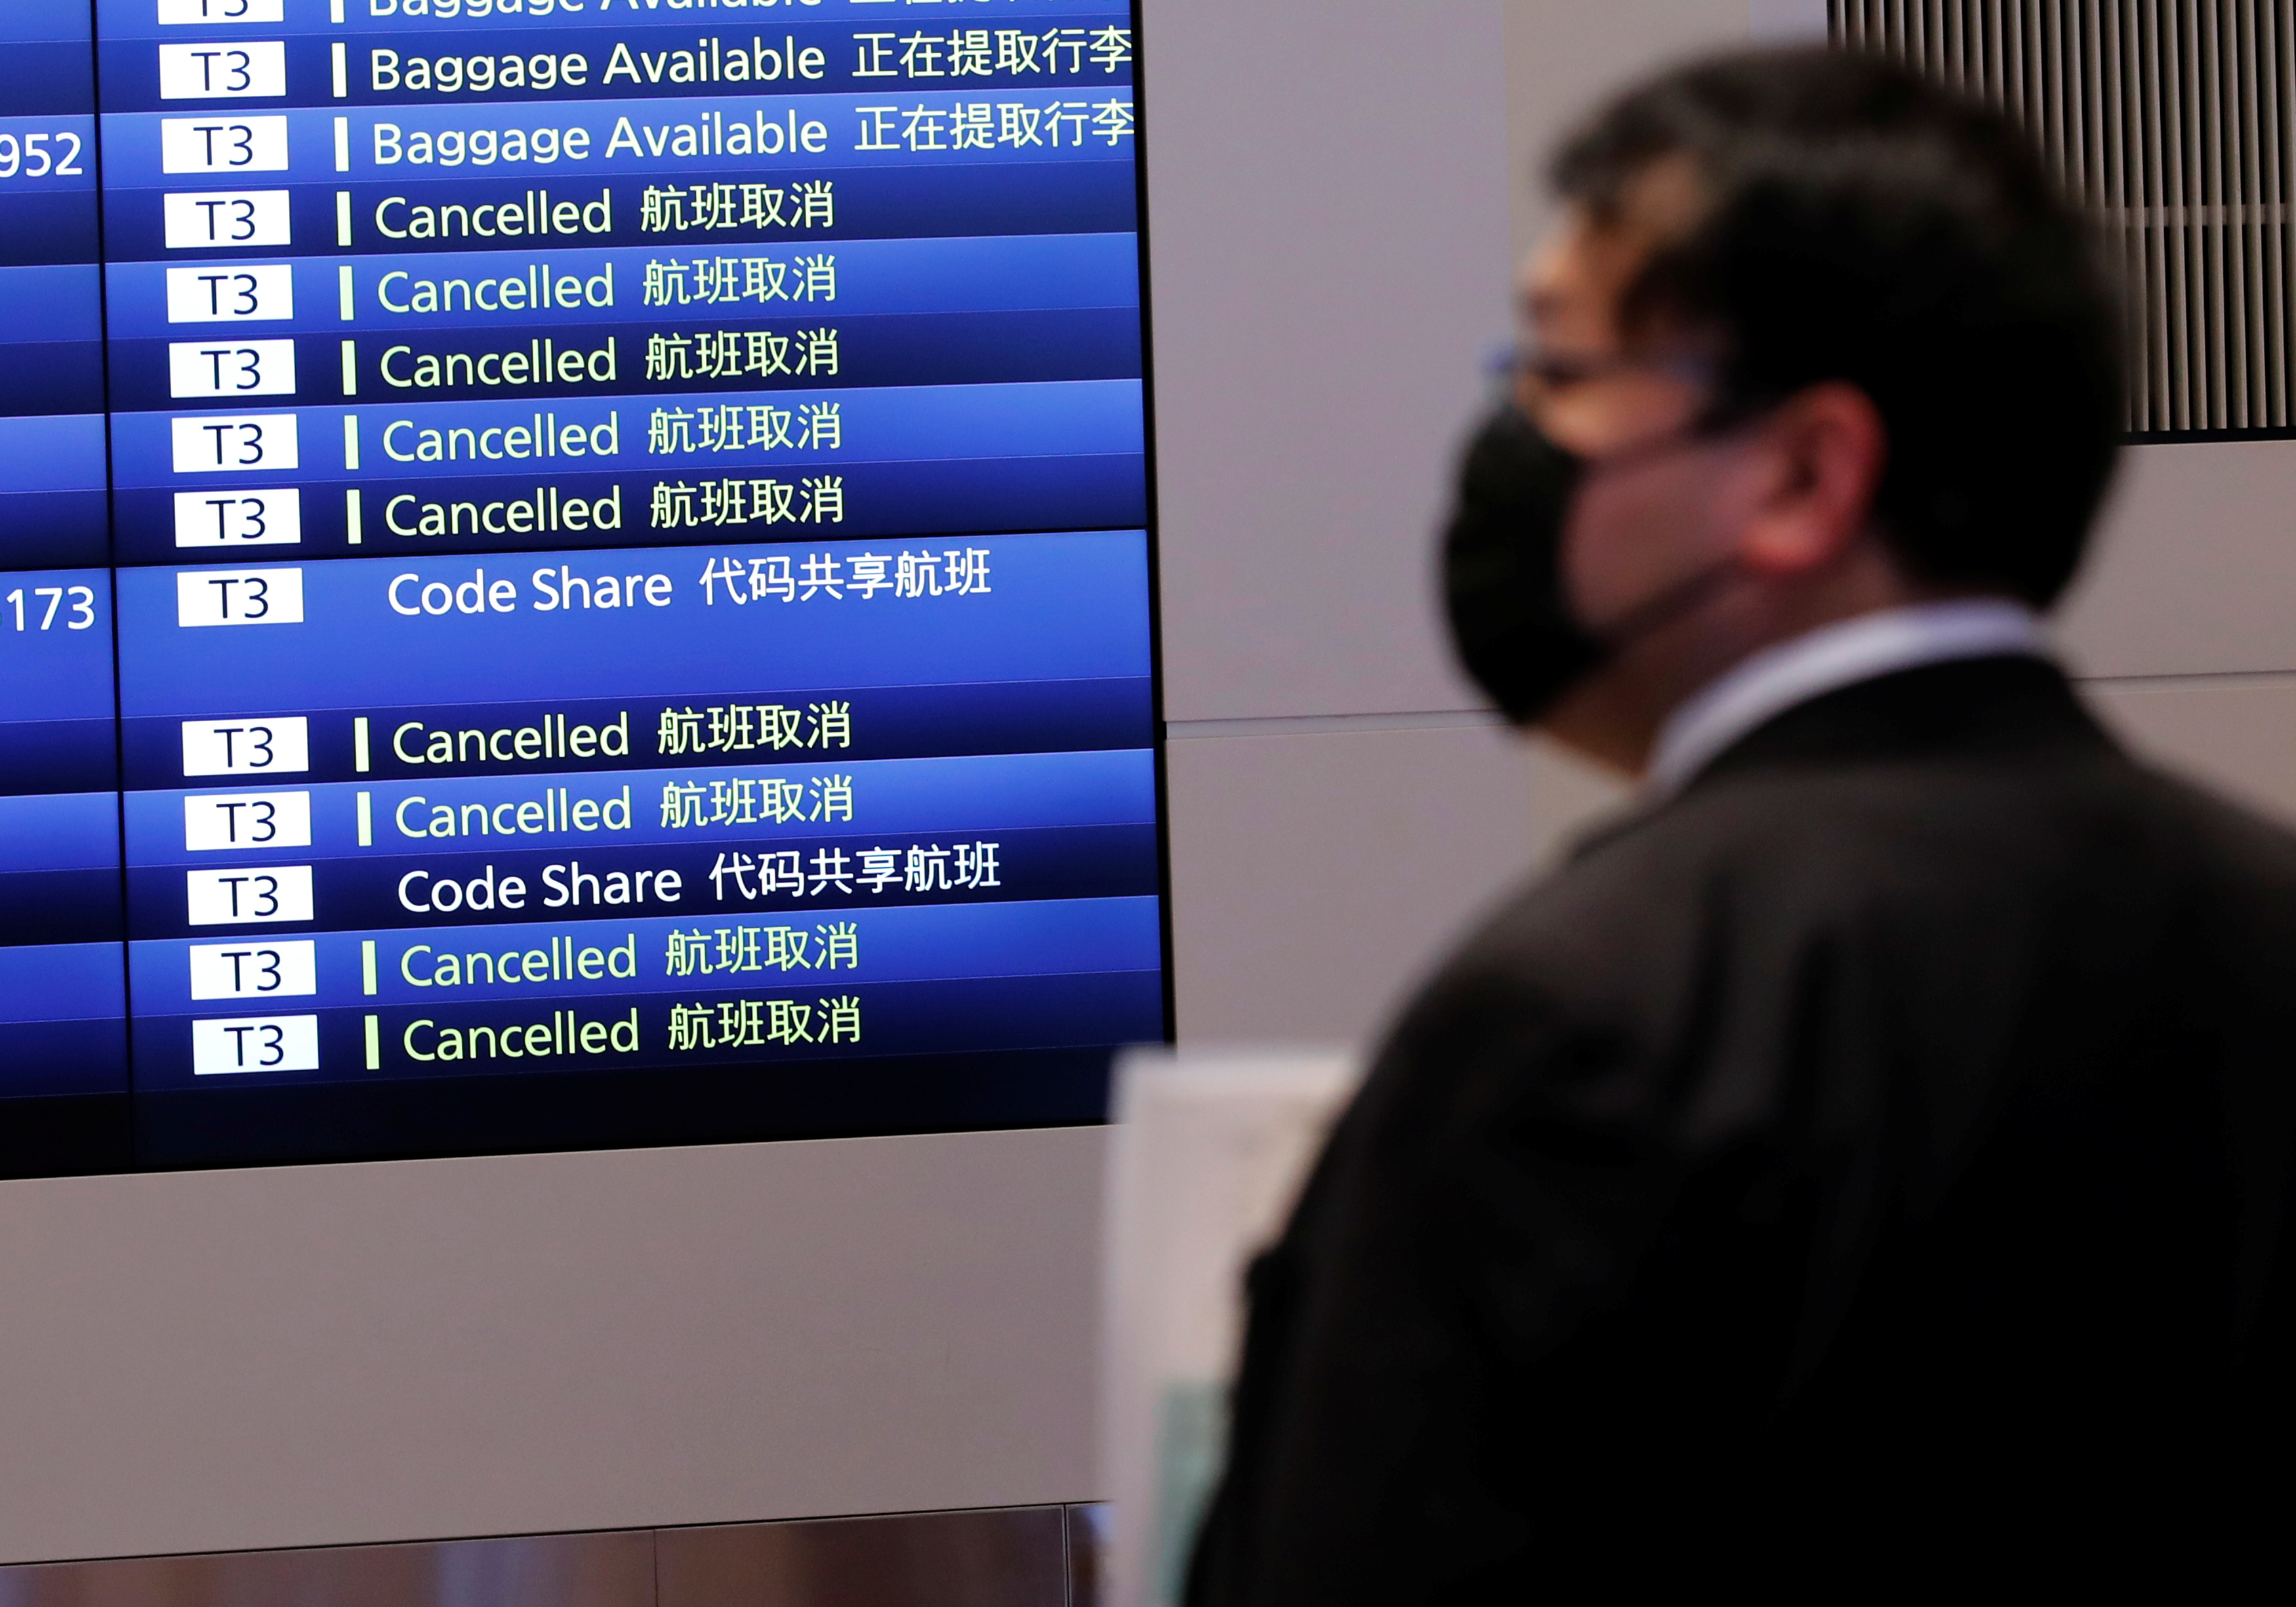 A man stands in front of a monitor showing flight schedules at an arrival hall of Haneda airport's international terminal, amid the coronavirus disease (COVID-19) outbreak, in Tokyo, Japan, November 29, 2021. REUTERS/Kim Kyung-Hoon